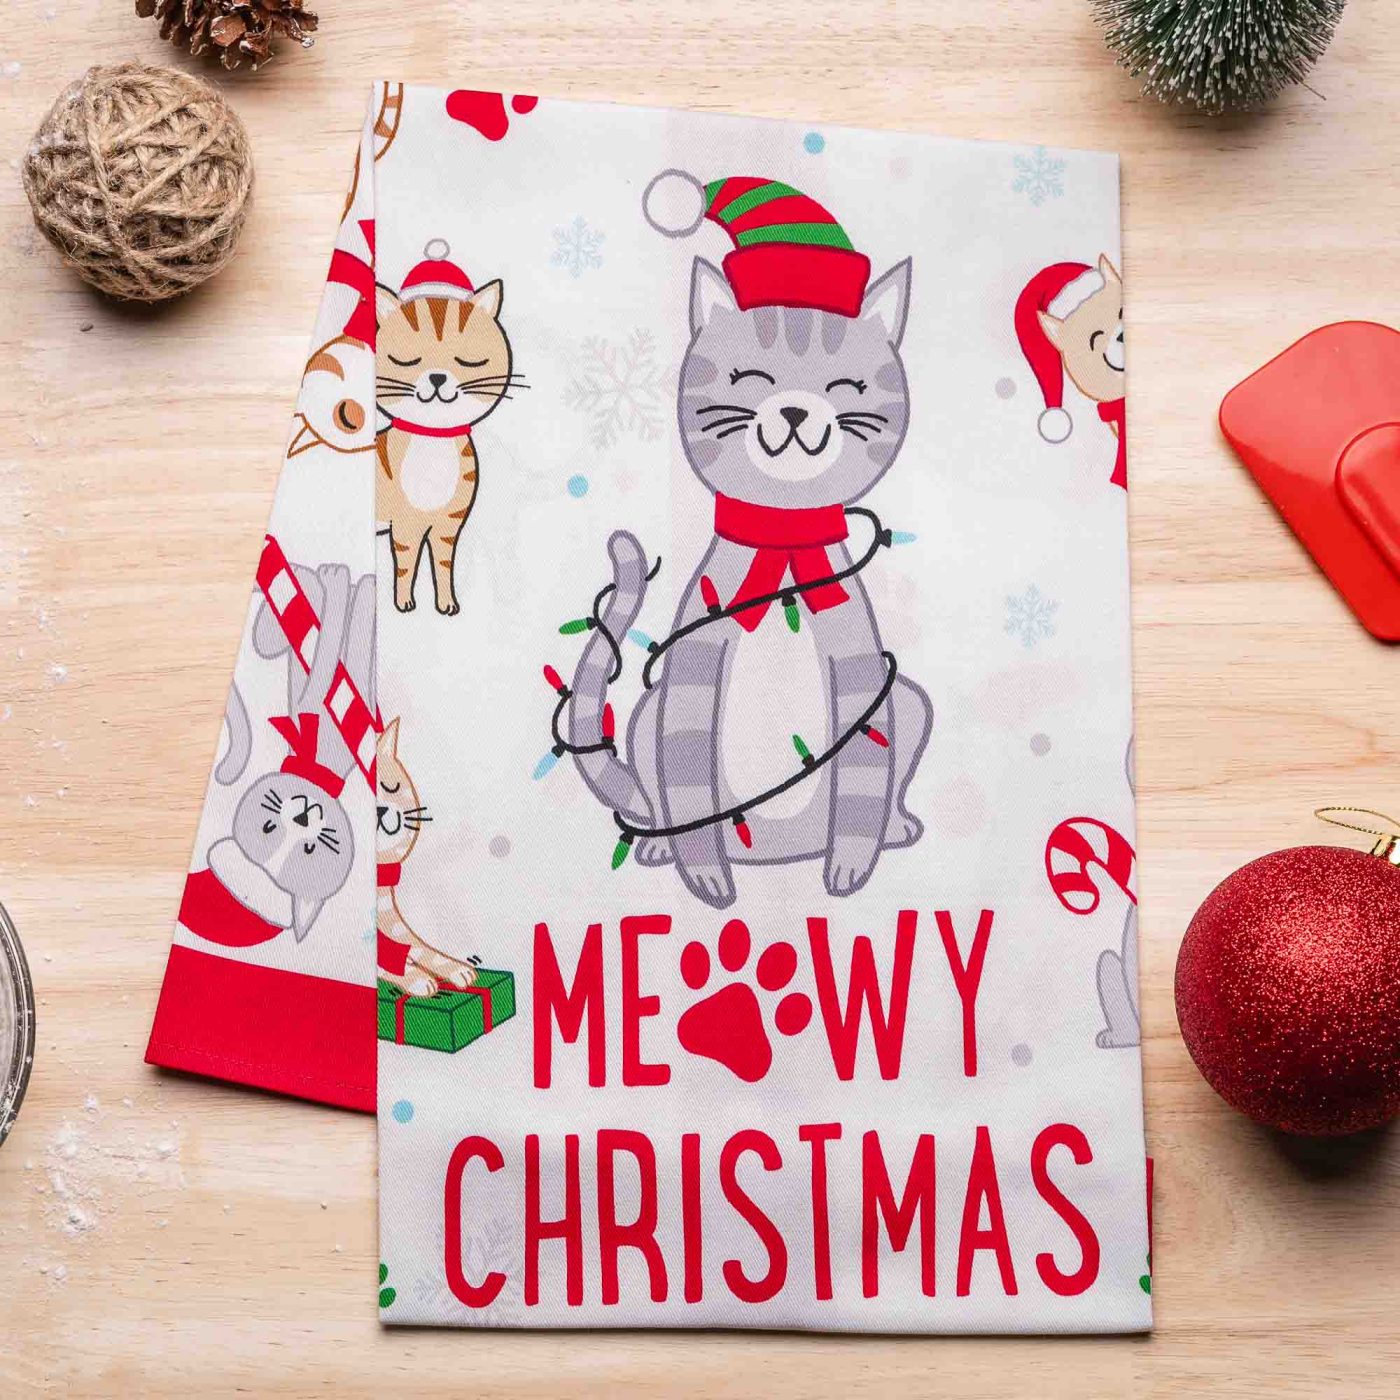 Meow-y Christmas Stencil by Studior12 DIY Cat Lover Holiday 